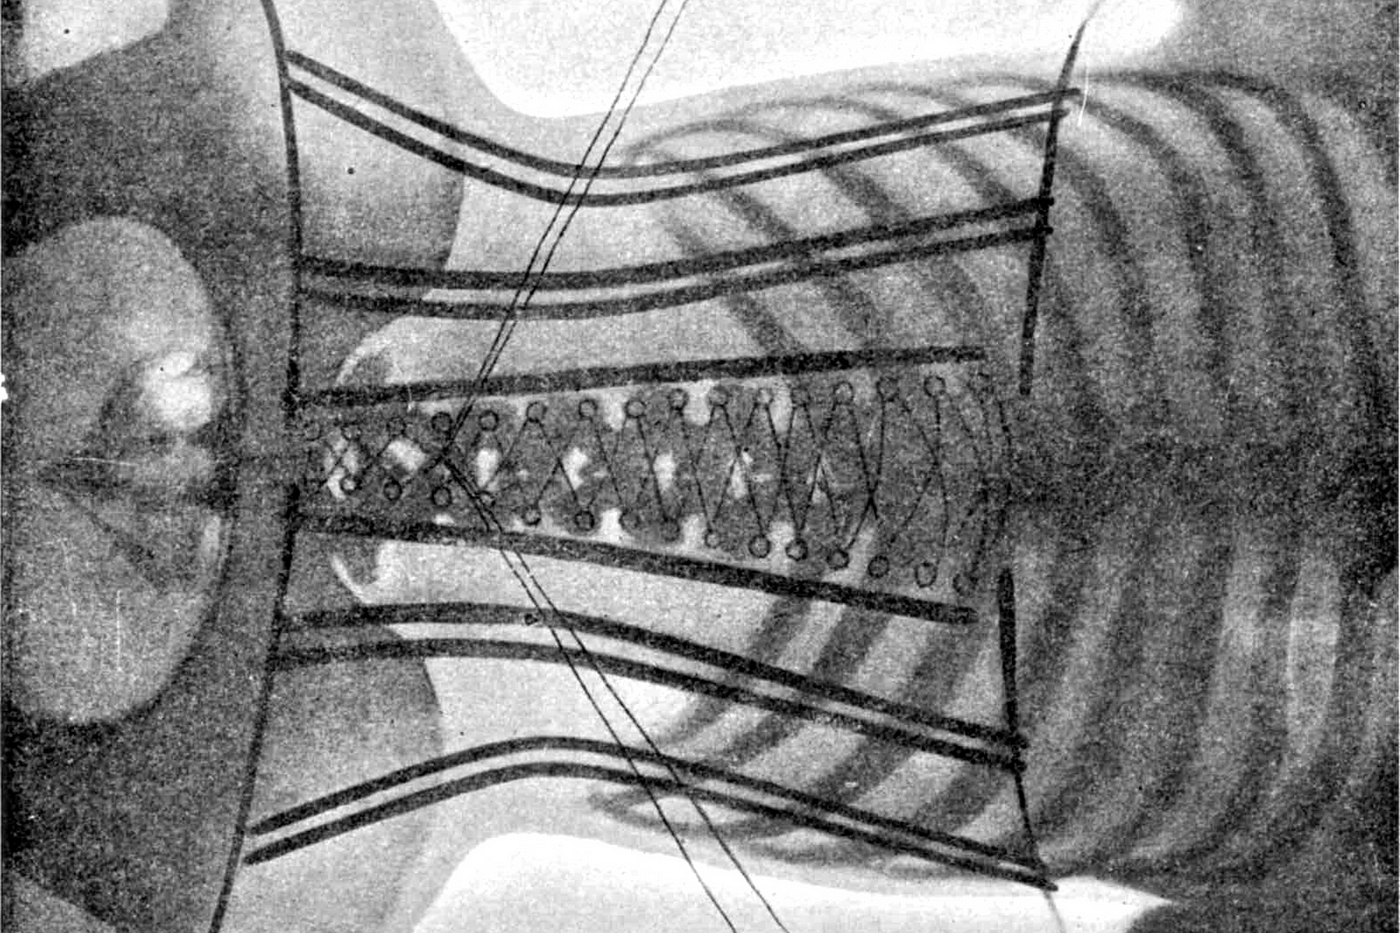 X-Rays Exposed the Corset's Lethality, by C.S. Voll